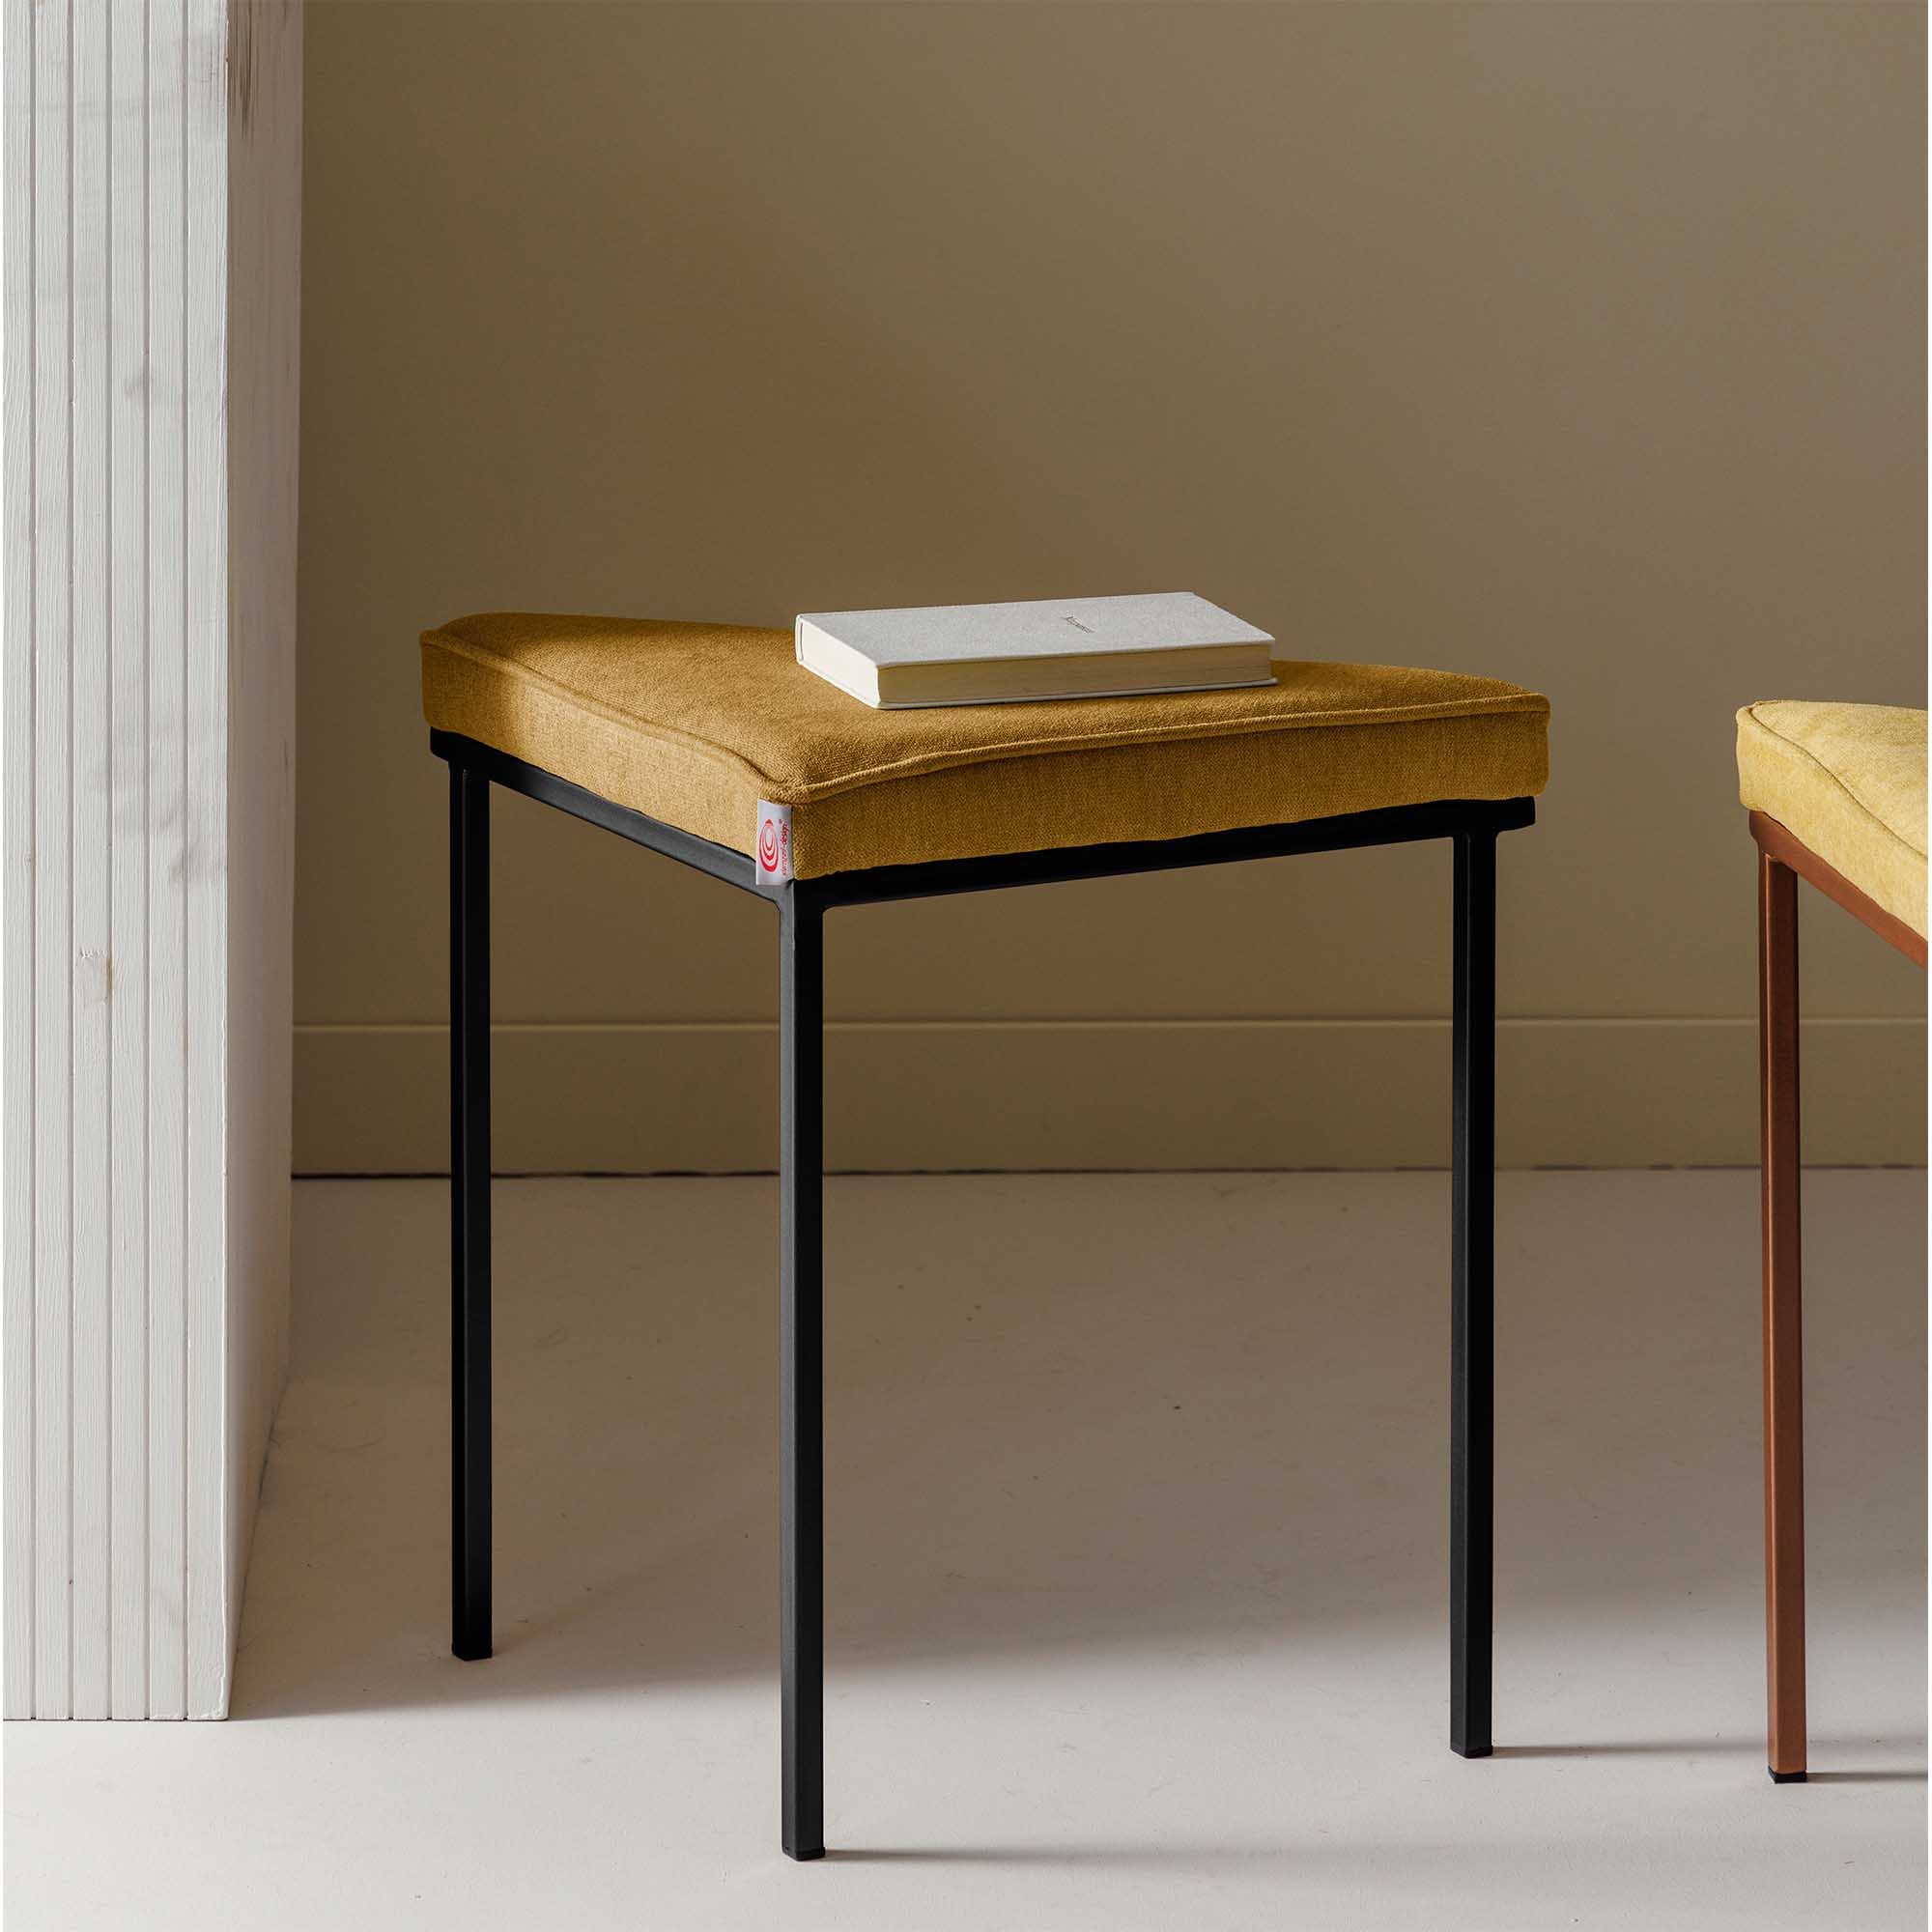 Tripod Stool, Powder-Coated Frame yellow fabric, black frame, interior view with book